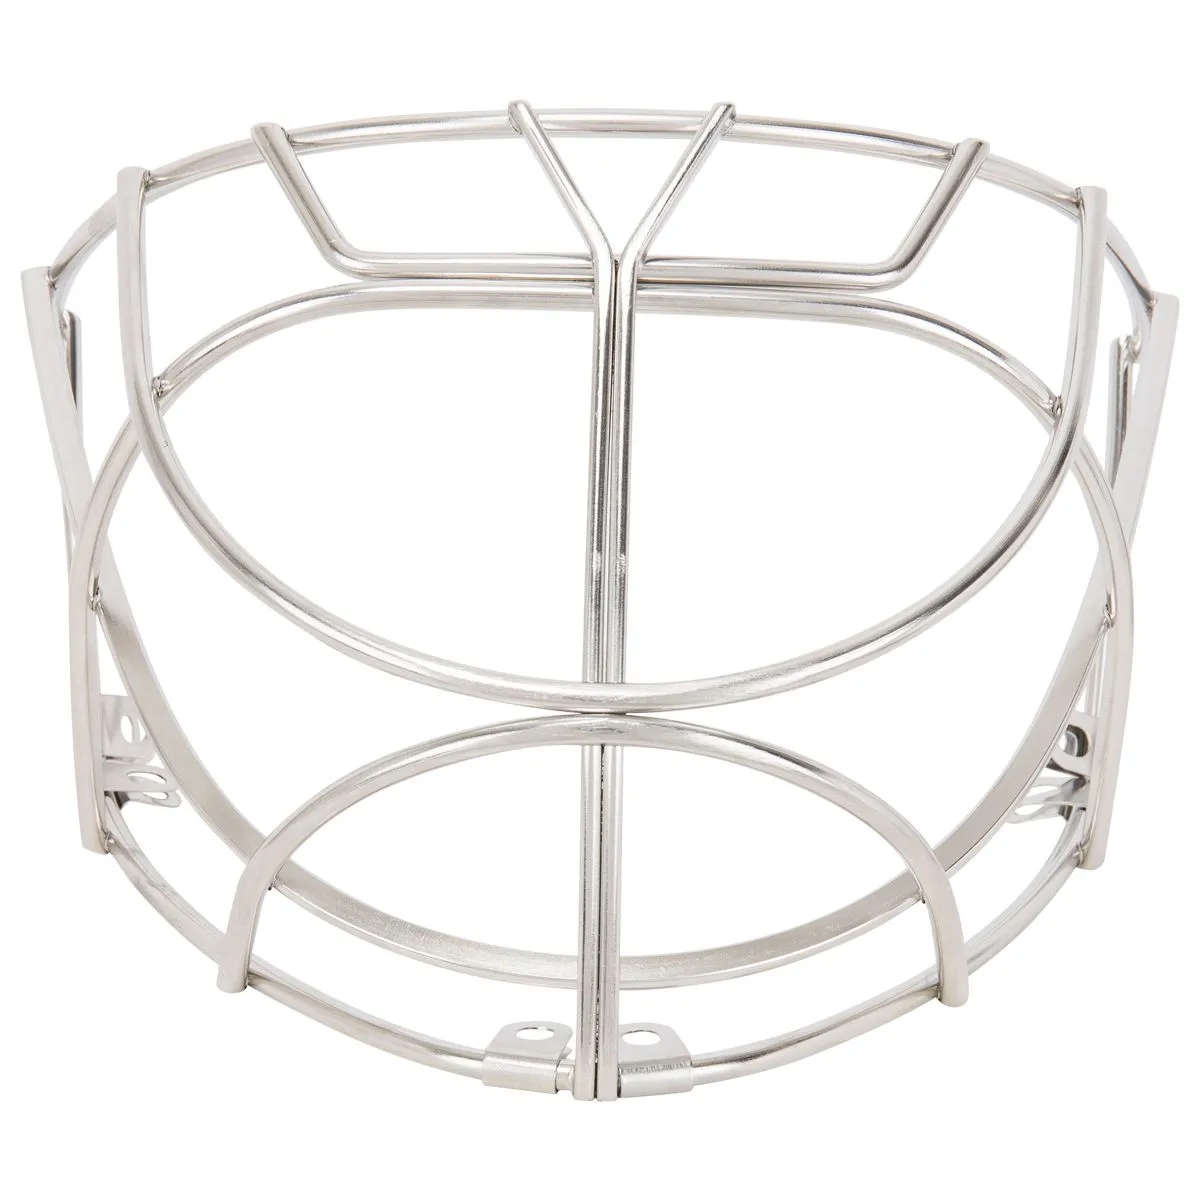 CCM Pro Stainless Steel Cat-Eye Goalie Cageproduct zoom image #1